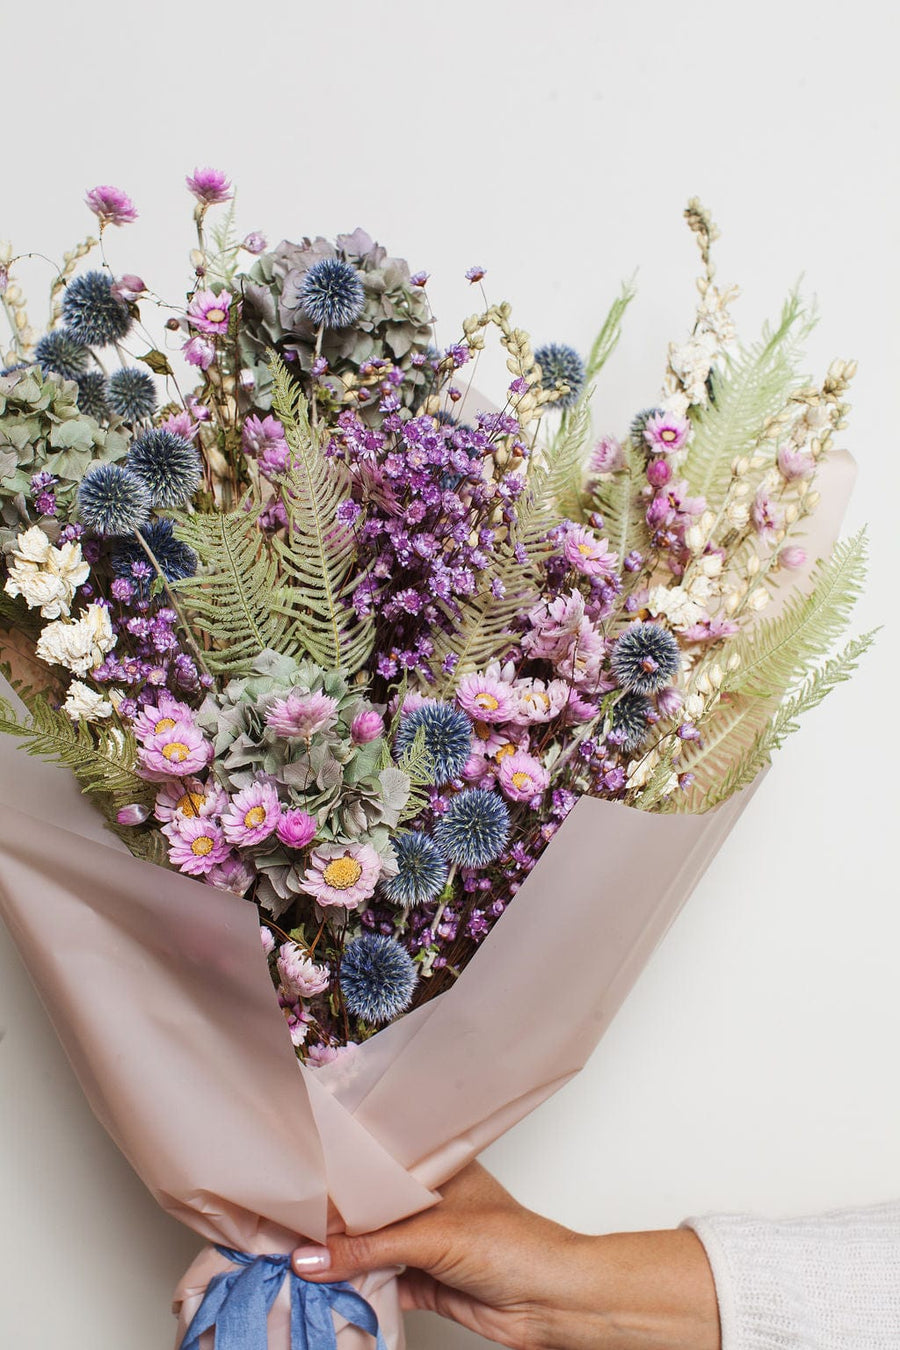 Best Online Dried Flowers - Delineate Your Dwelling